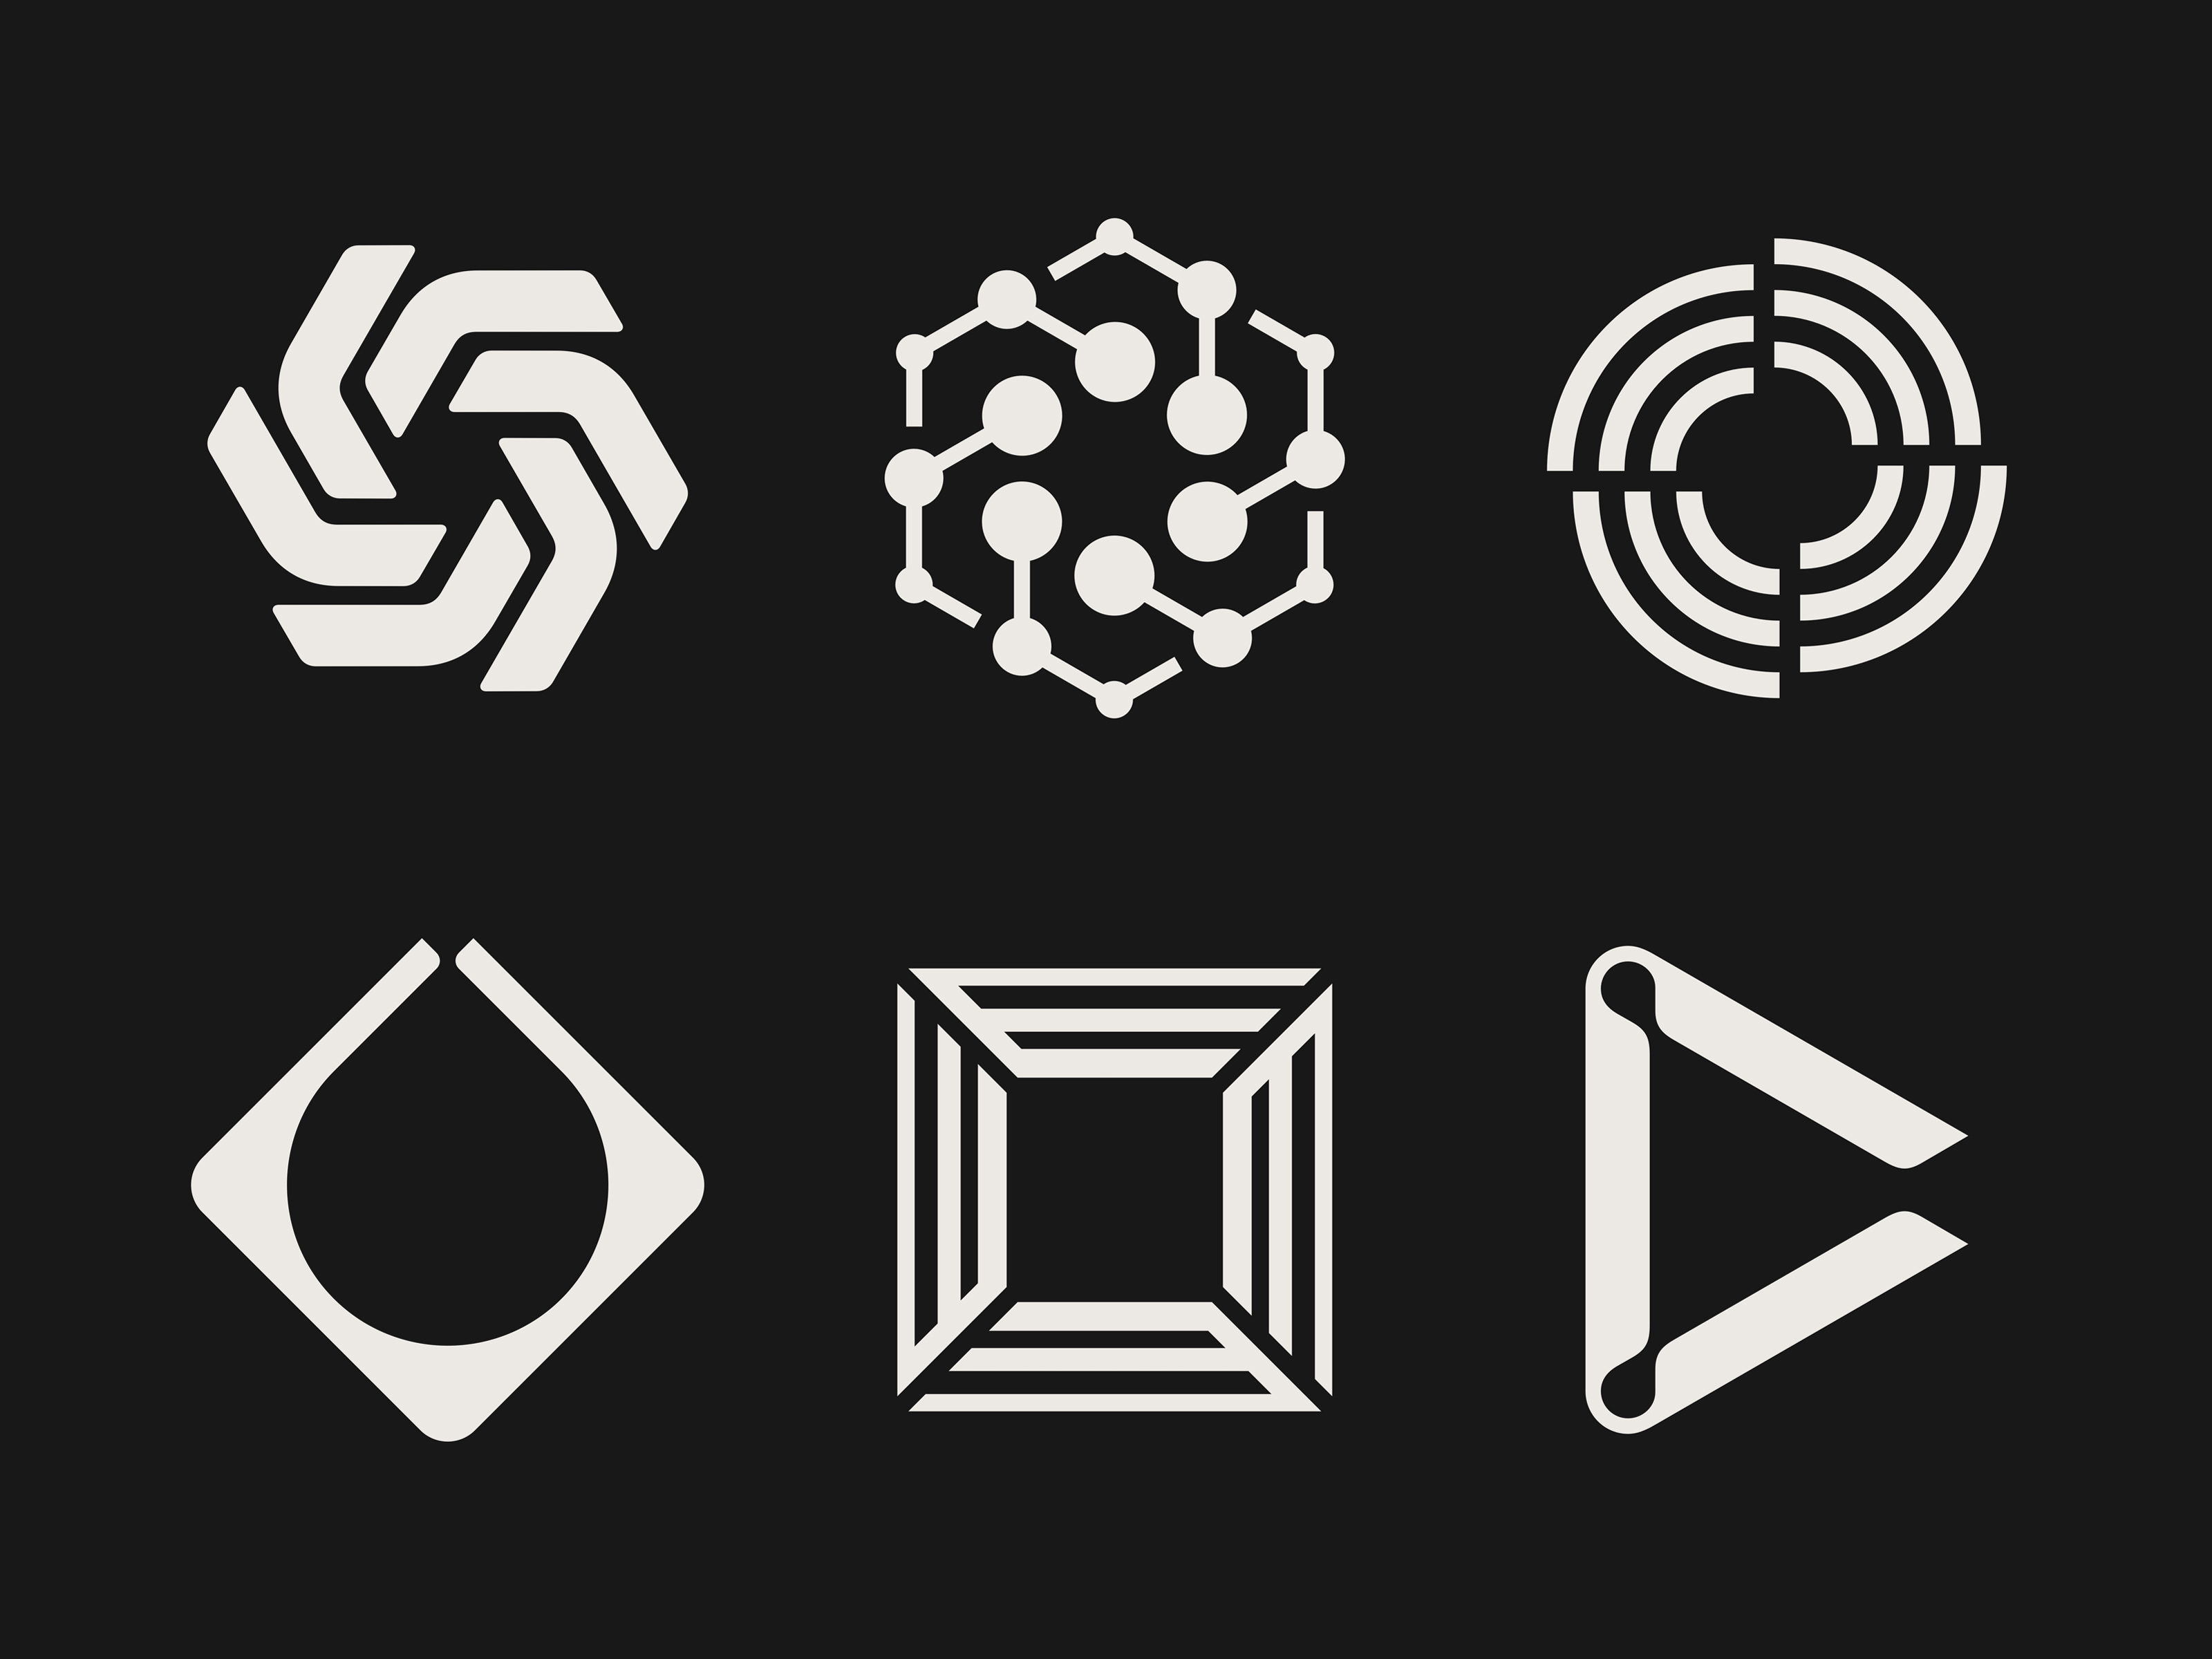 Abstract Logos Roundup by Type08 (Alen Pavlovic) on Dribbble